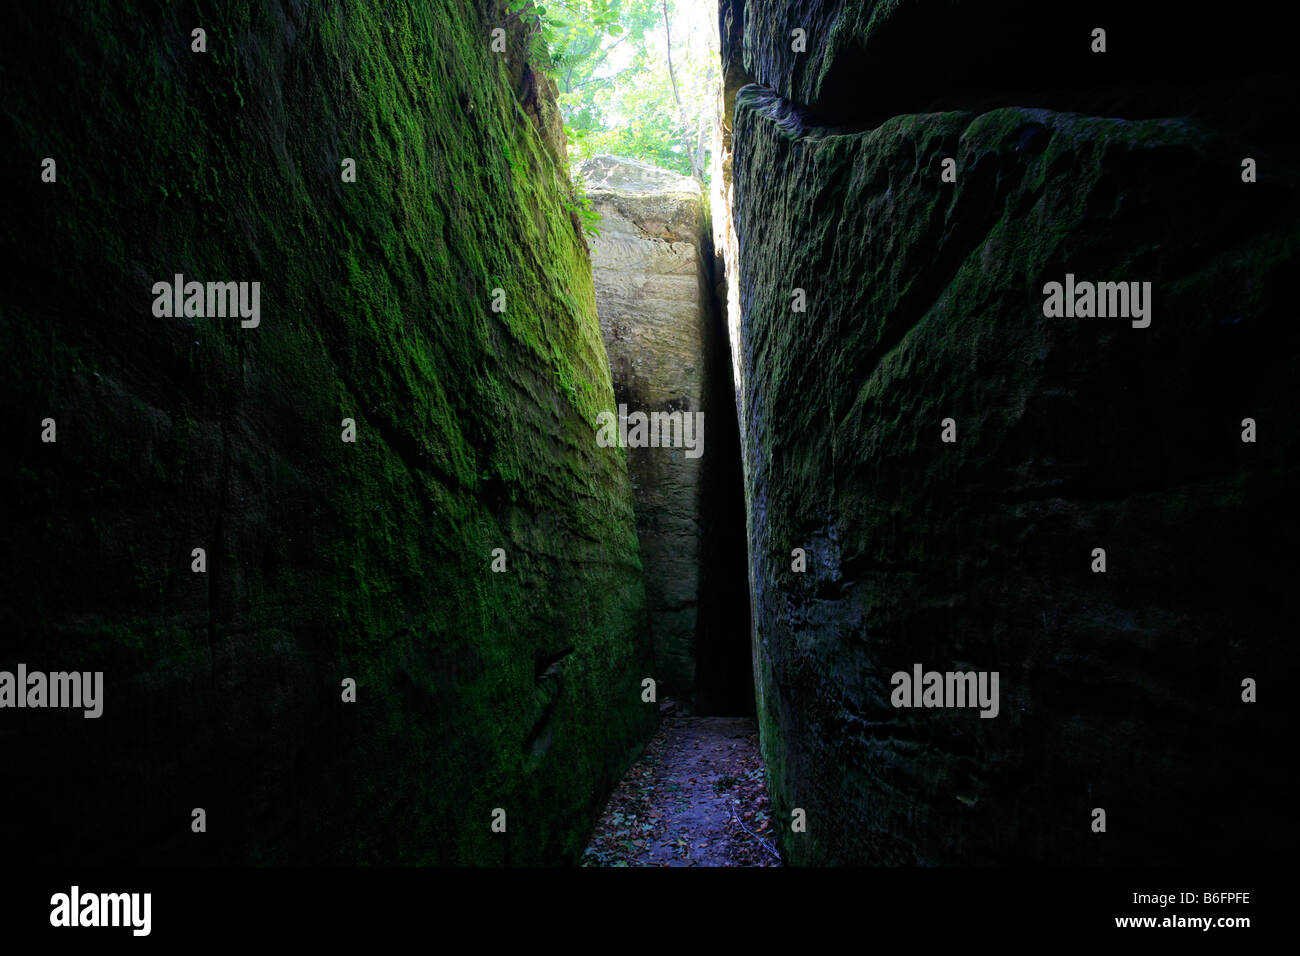 Steep sandstone formations and narrow fissures in the Rim Rock Trail, a hiking tour in the Shawnee National Forest, Illinois, U Stock Photo